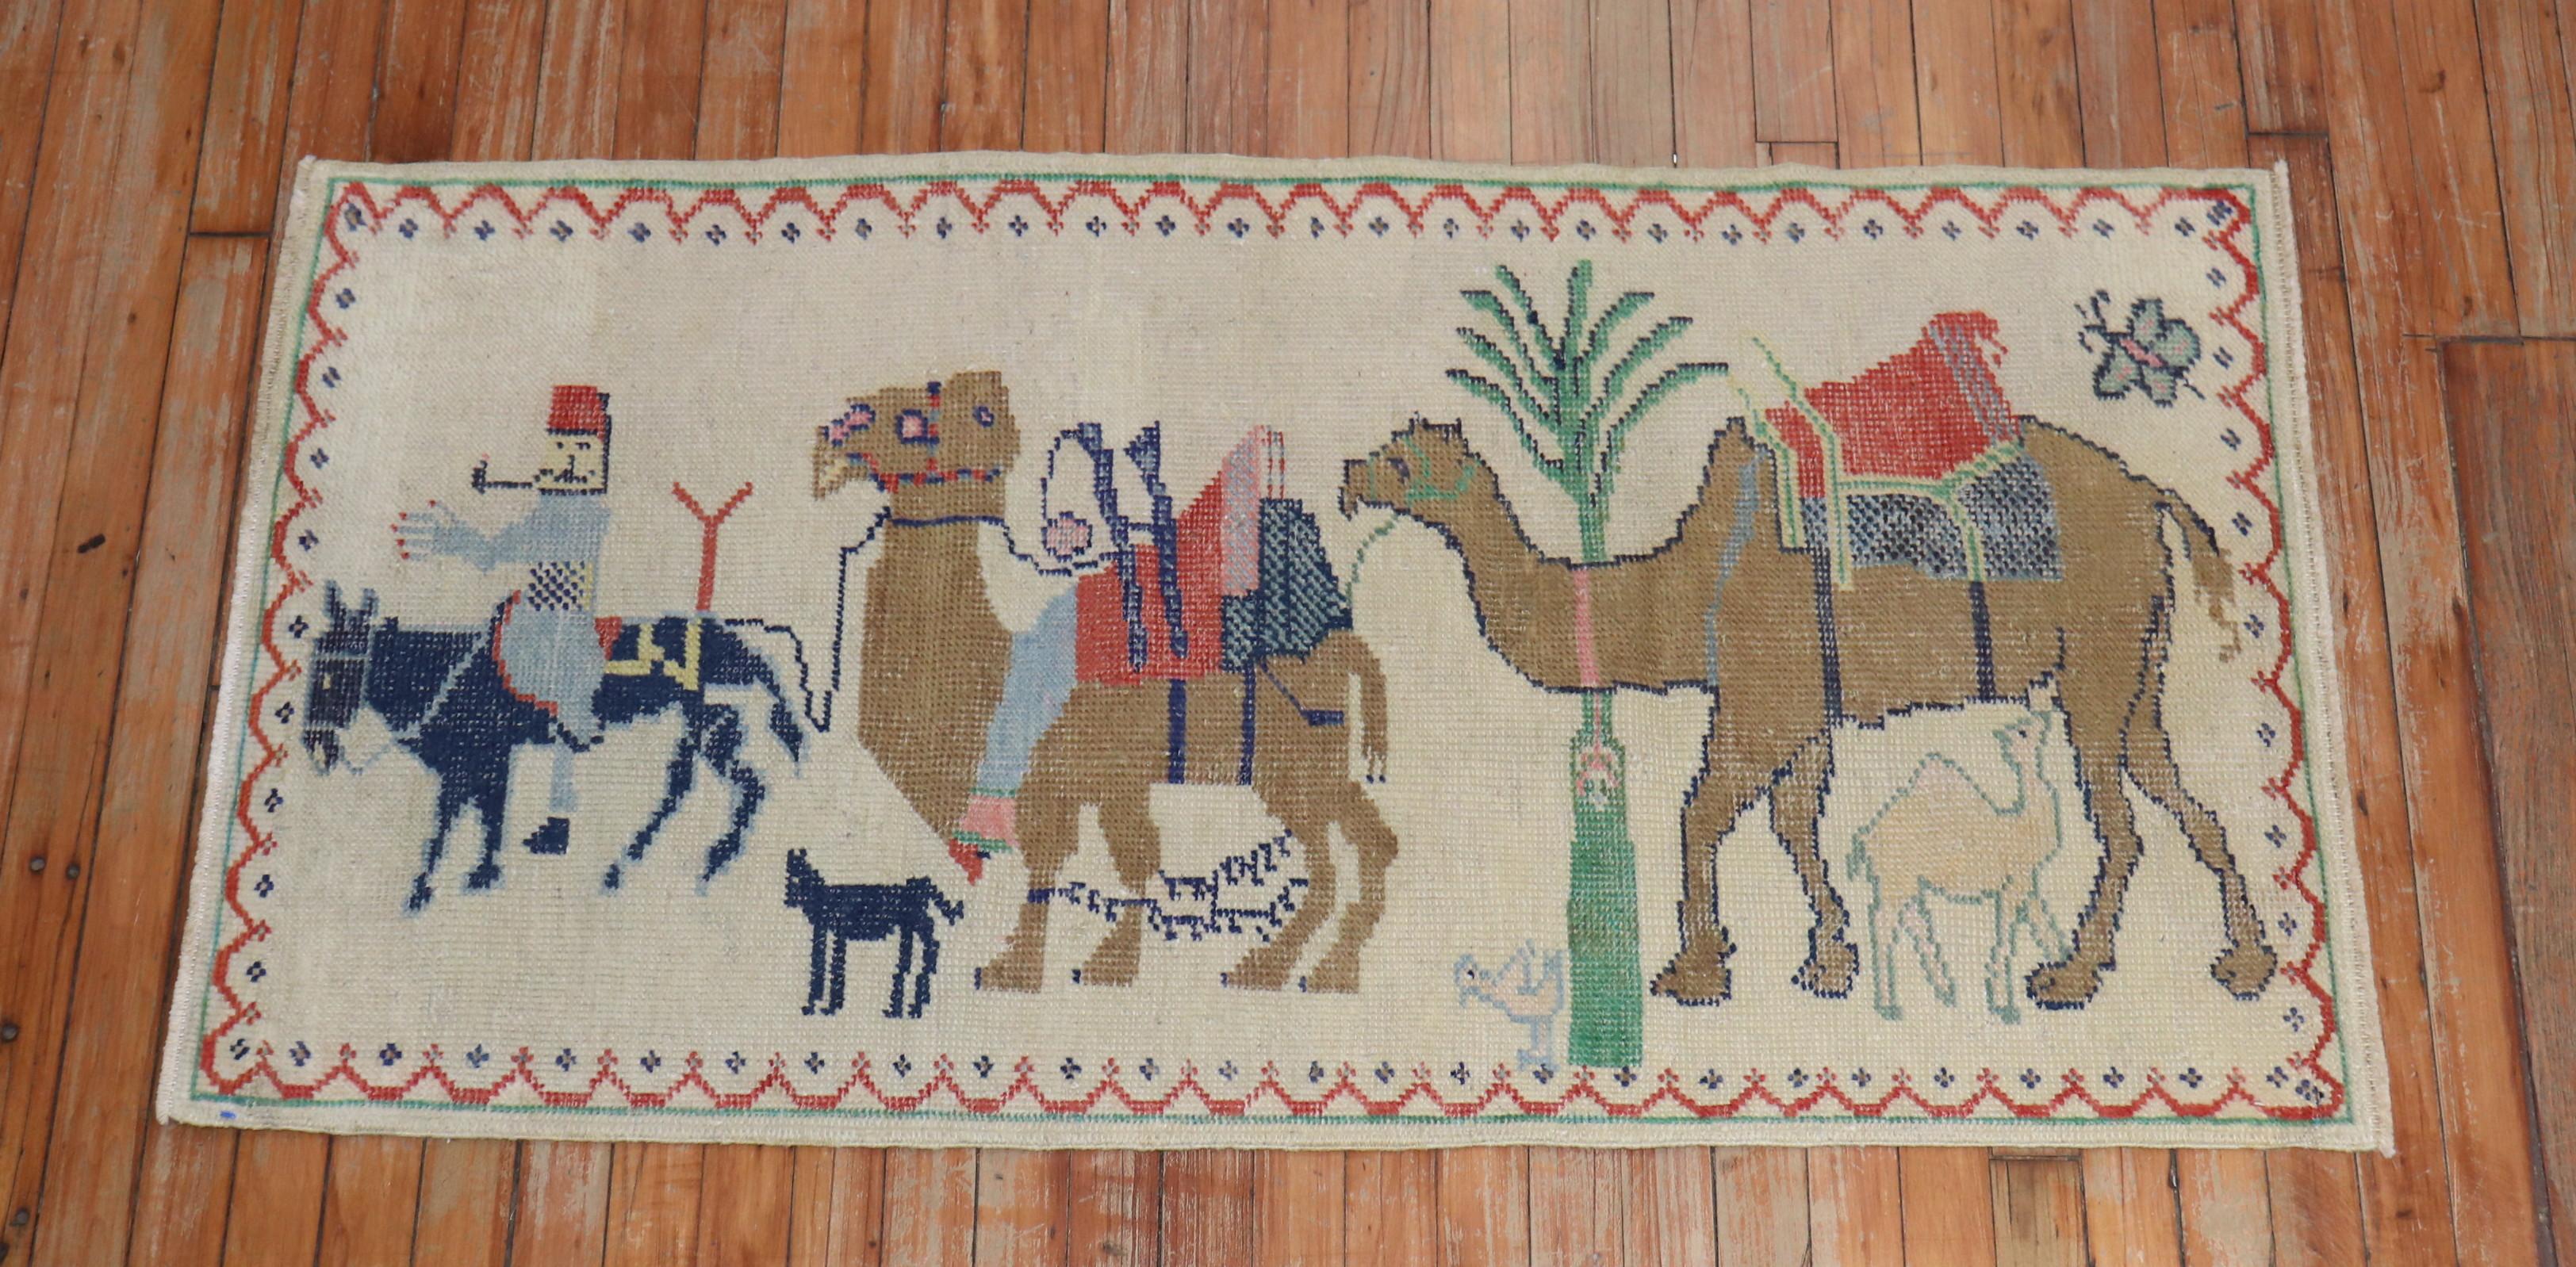 Mid 20th century Turkish Anatolian rug with a pictorial scene with a man riding on his horse strolling a donkey and a camel on an ivory field
Size: 2'5'' x 4'7''.